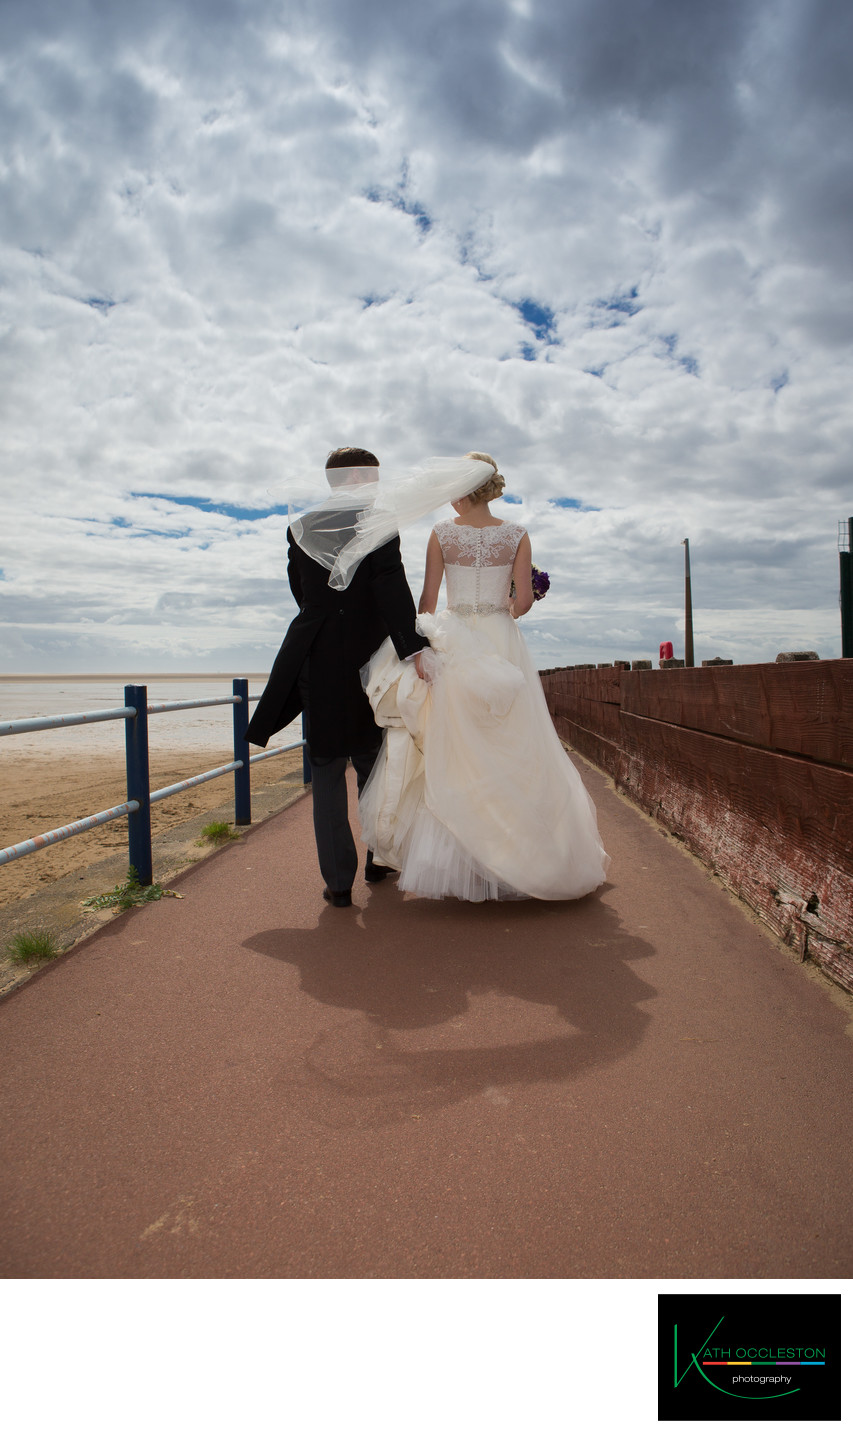 Windy wedding day photography in St Annes on Sea